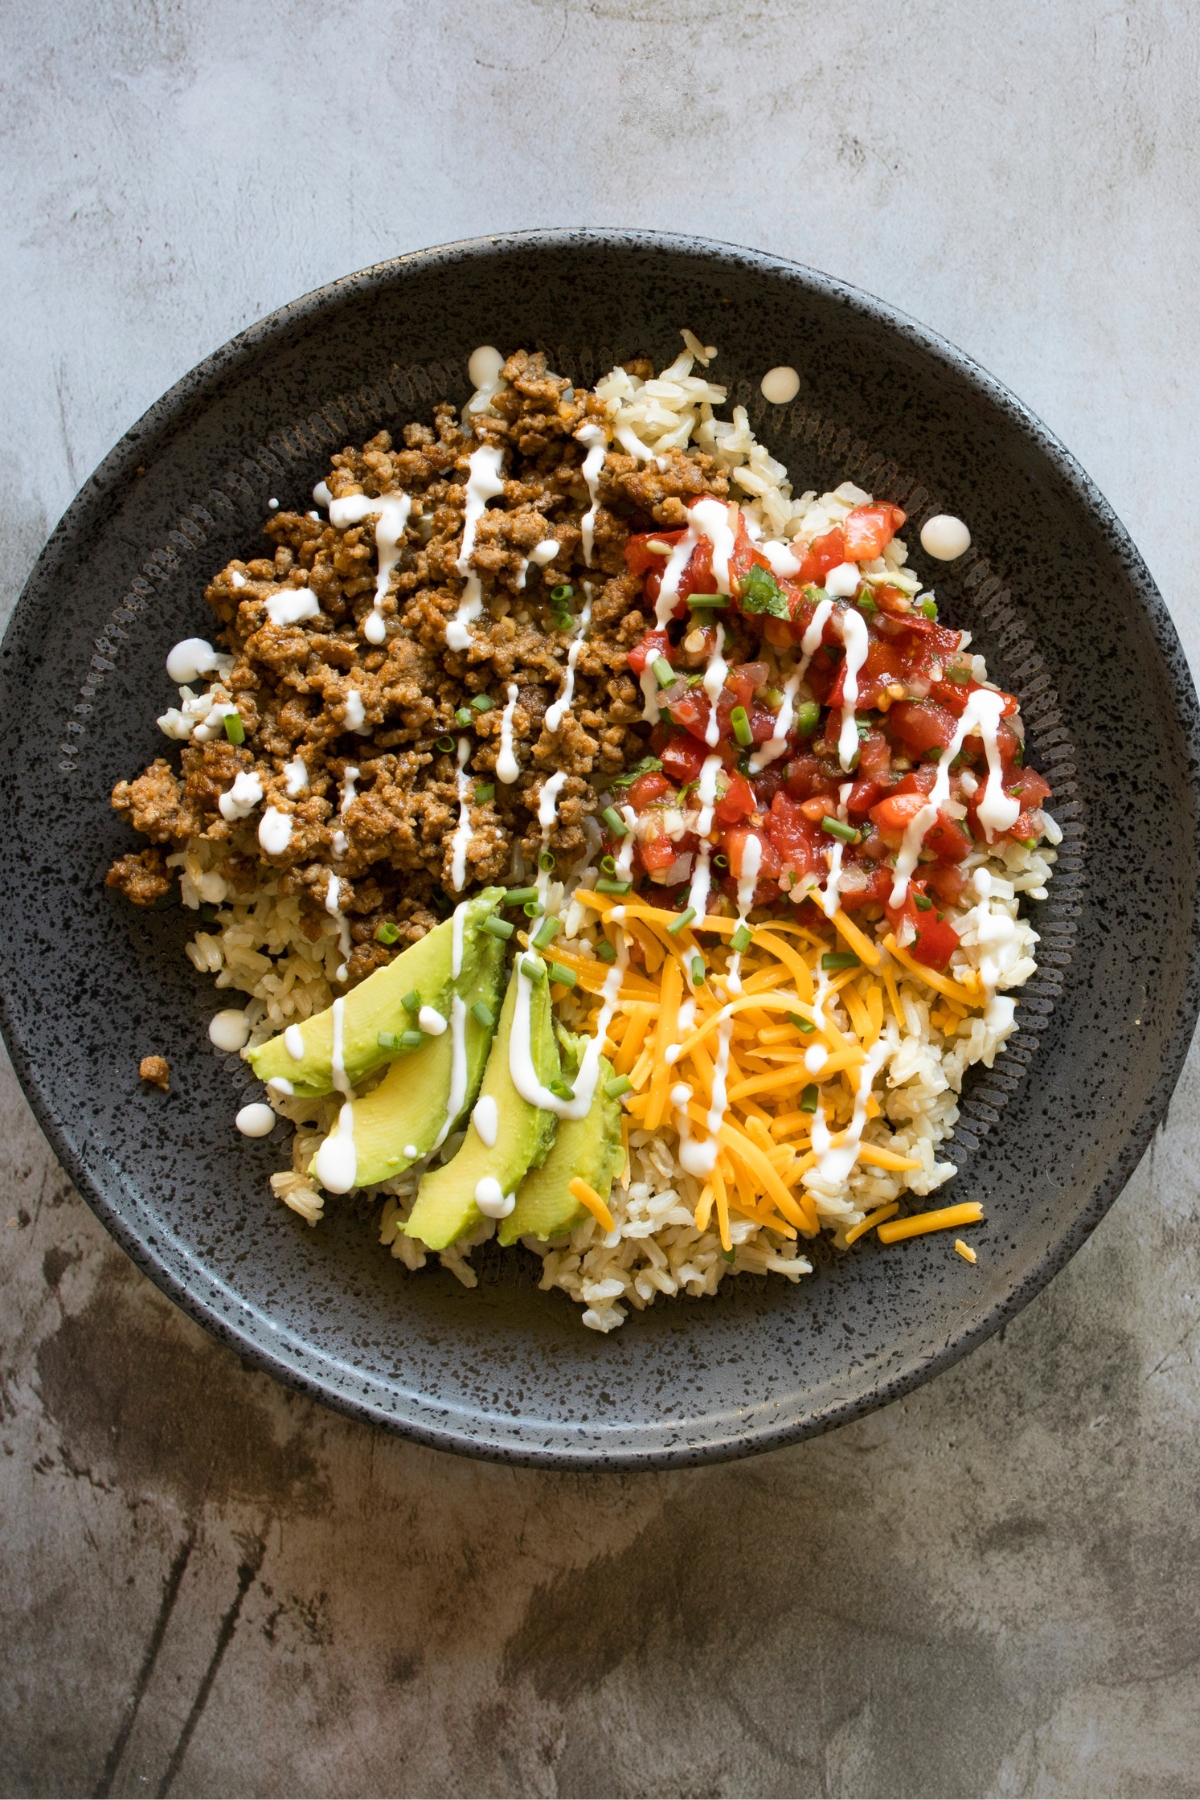 Mexican Taco Salad with Ground Beef, Avocado, Salsa and Cheese